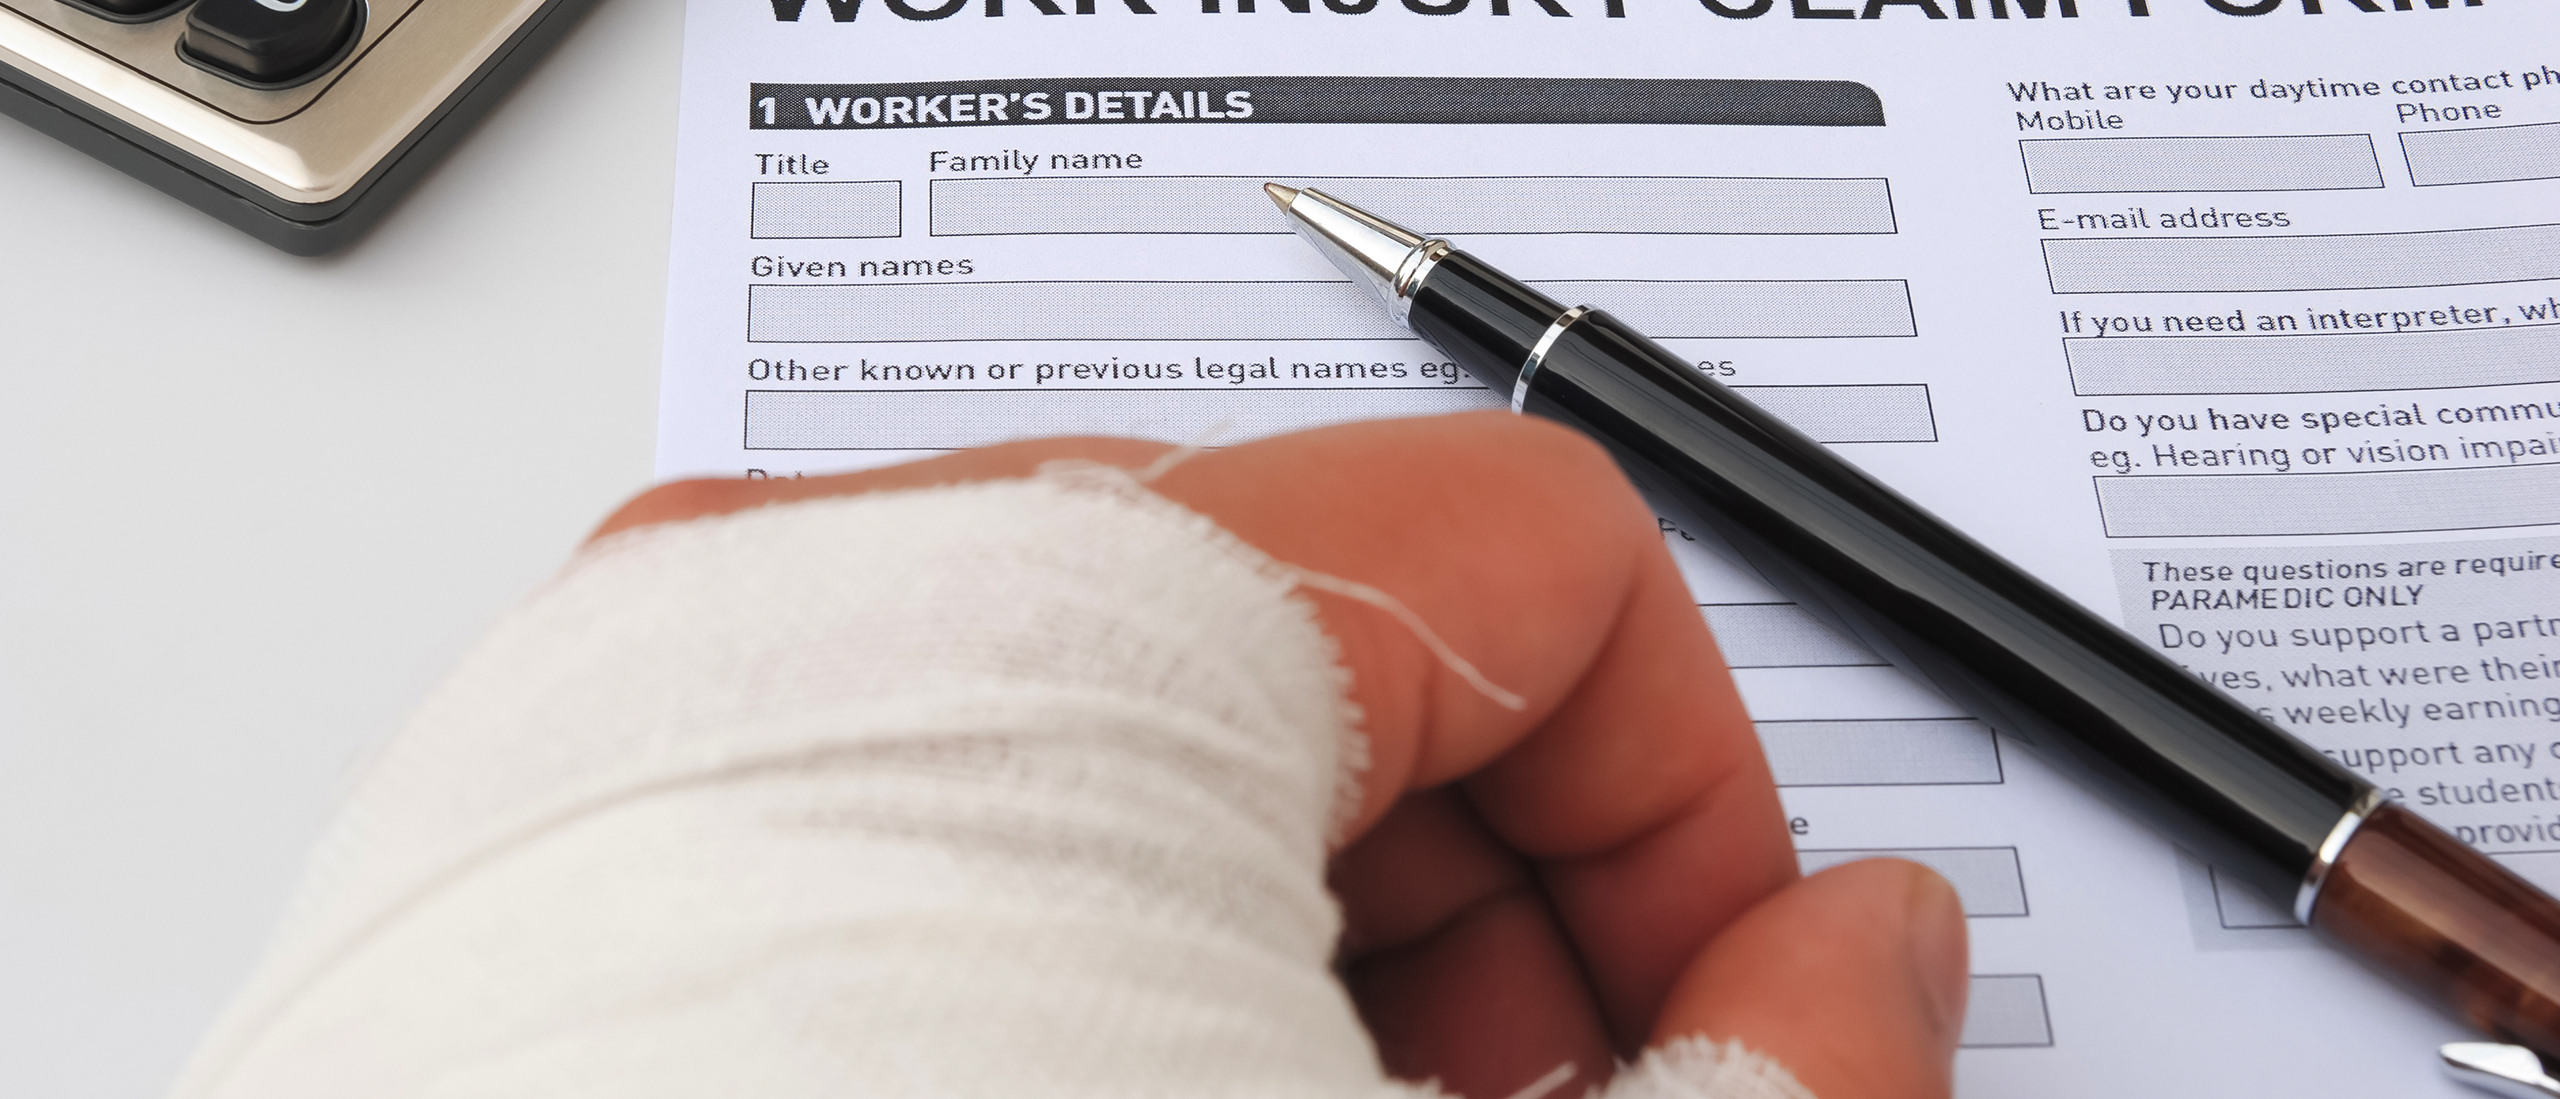 Worker files a workers' compensation appeal.